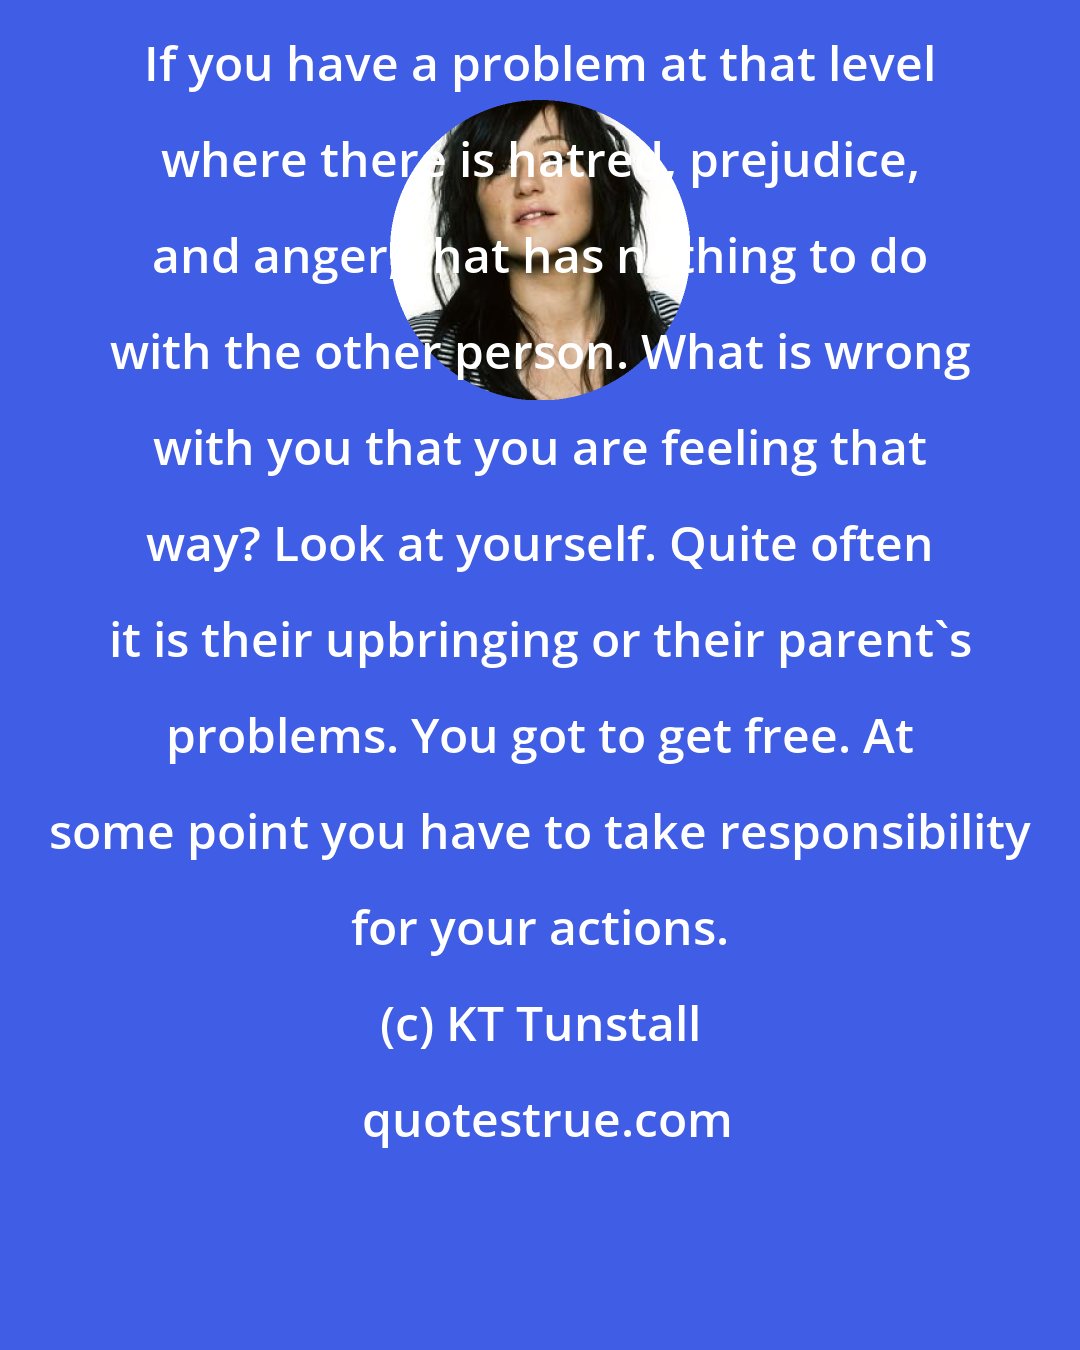 KT Tunstall: If you have a problem at that level where there is hatred, prejudice, and anger, that has nothing to do with the other person. What is wrong with you that you are feeling that way? Look at yourself. Quite often it is their upbringing or their parent's problems. You got to get free. At some point you have to take responsibility for your actions.